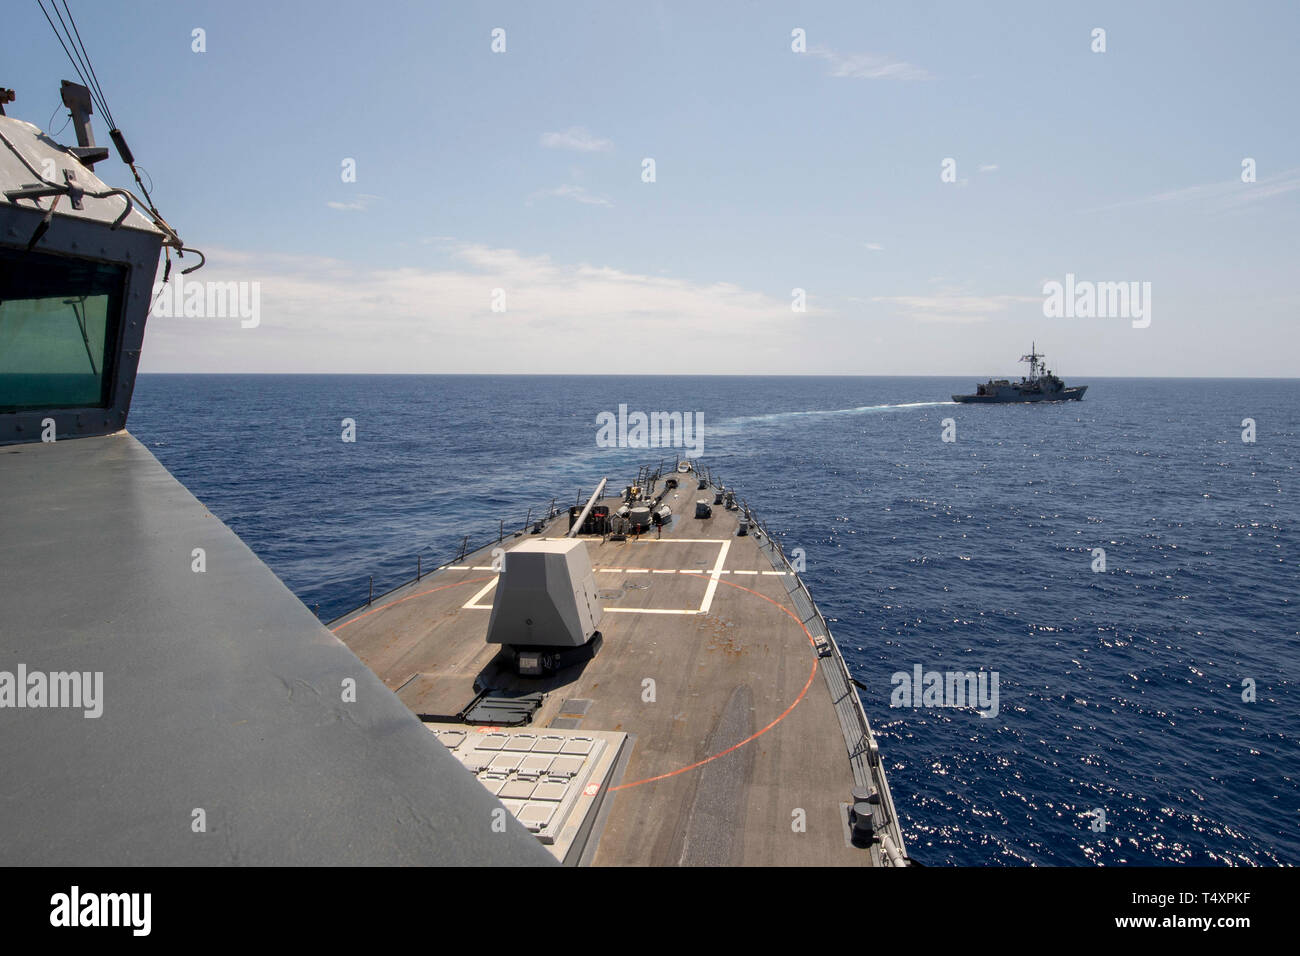 190418-N-UI104-0307     PHILIPPINE SEA (April 18, 2019) The Arleigh Burke-class guided-missile destroyer USS Preble (DDG 88) and the Royal Australian Navy Adelaide-class guided-missile frigate HMAS Melbourne (FFG 05) transit in formation during a cooperative deployment. Preble and Melbourne are participating in a cooperative deployment in order to improve on maritime capabilities between partners.  Preble is deployed to the U.S 7th Fleet area of operations in support of security and stability in the Indo-Pacific region. (U.S. Navy photo by Mass Communication Specialist 1st Class Bryan Niegel/R Stock Photo